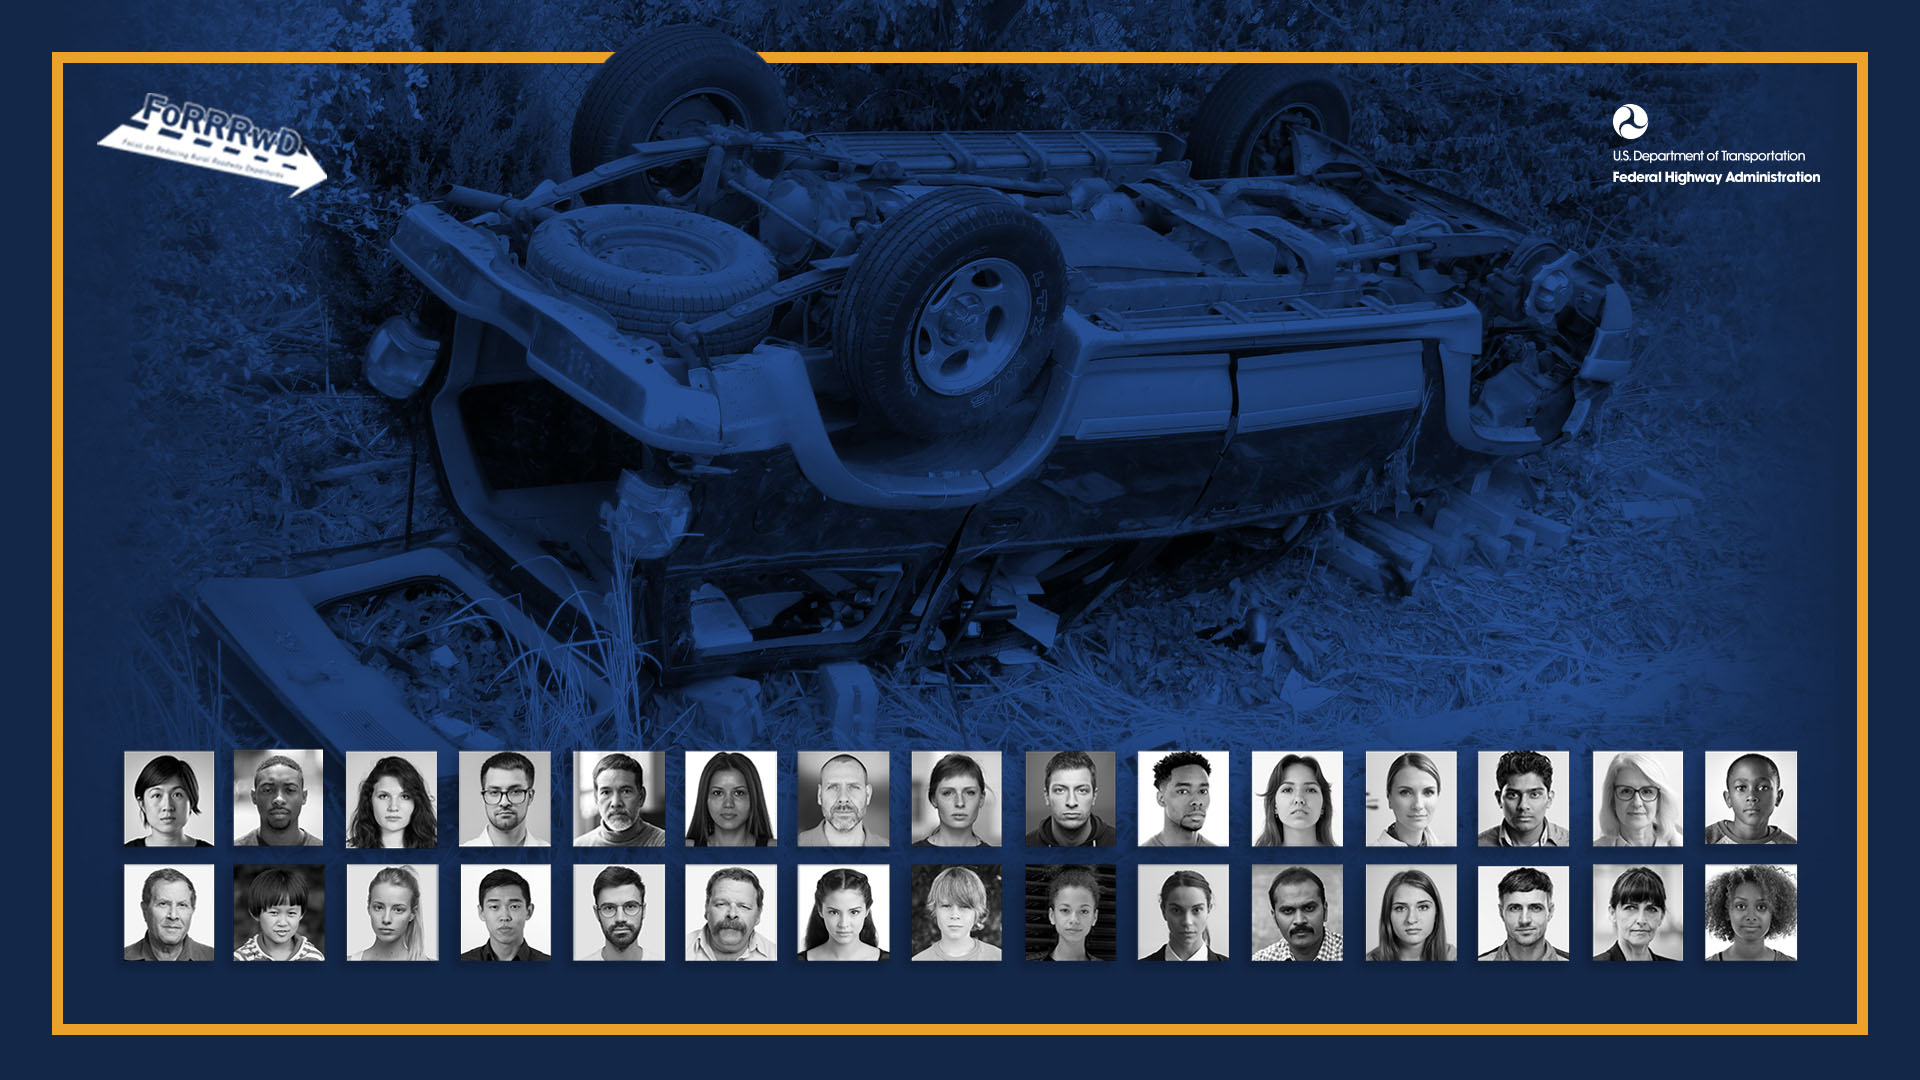 Graphic showing 30 human faces over a blue background of a crashed car rolled over. FoRRRwd and FHWA logos are at the top of the graphic.”